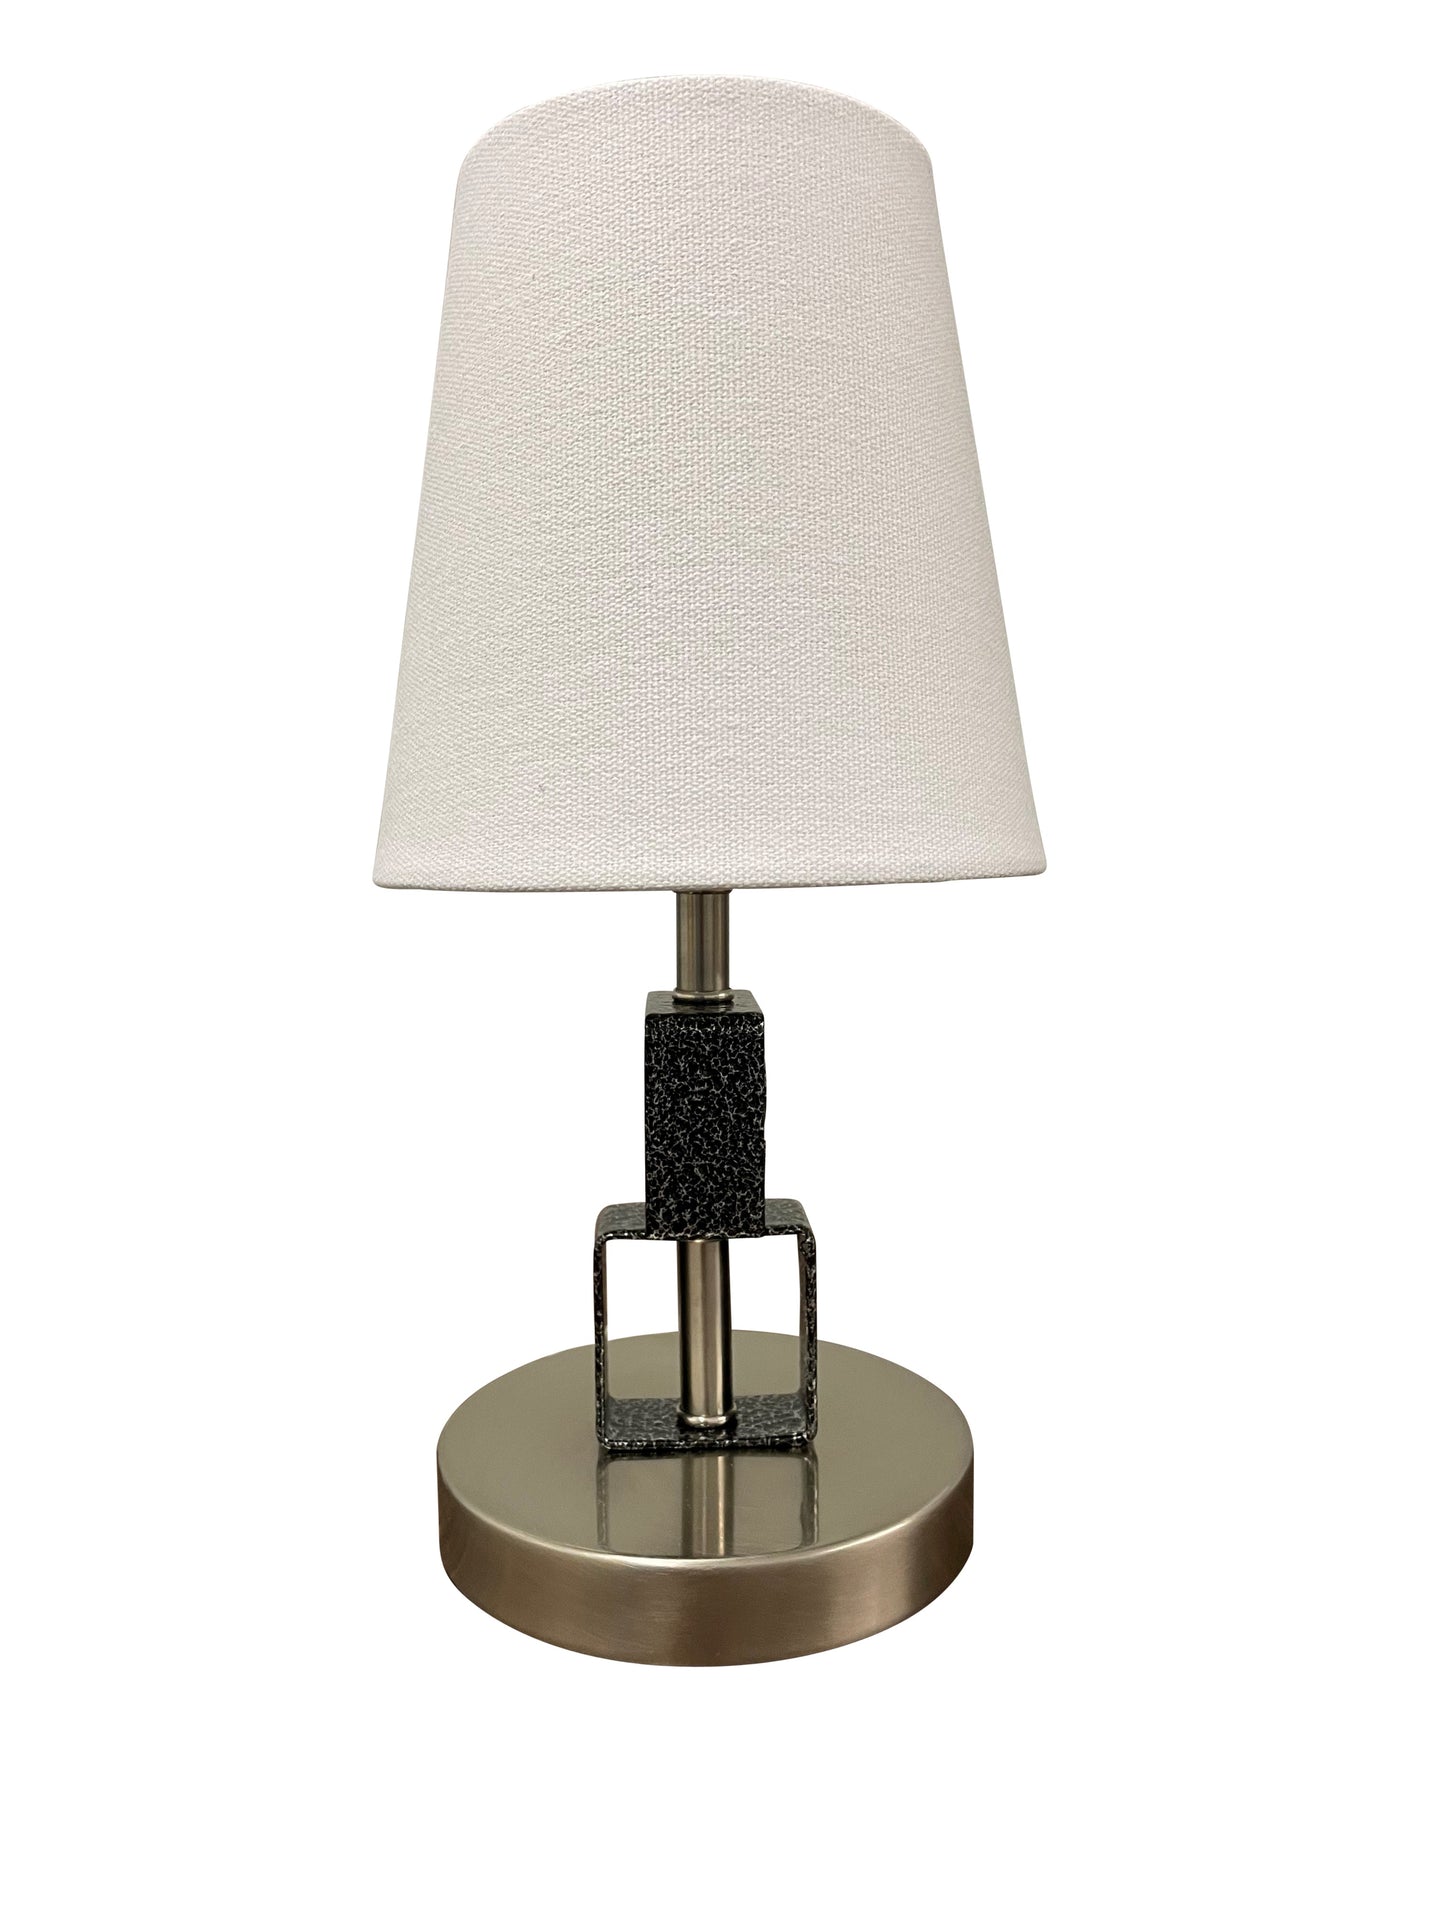 Bryson Mini Satin Nickel Supreme Silver Accent Lamp by House of Troy